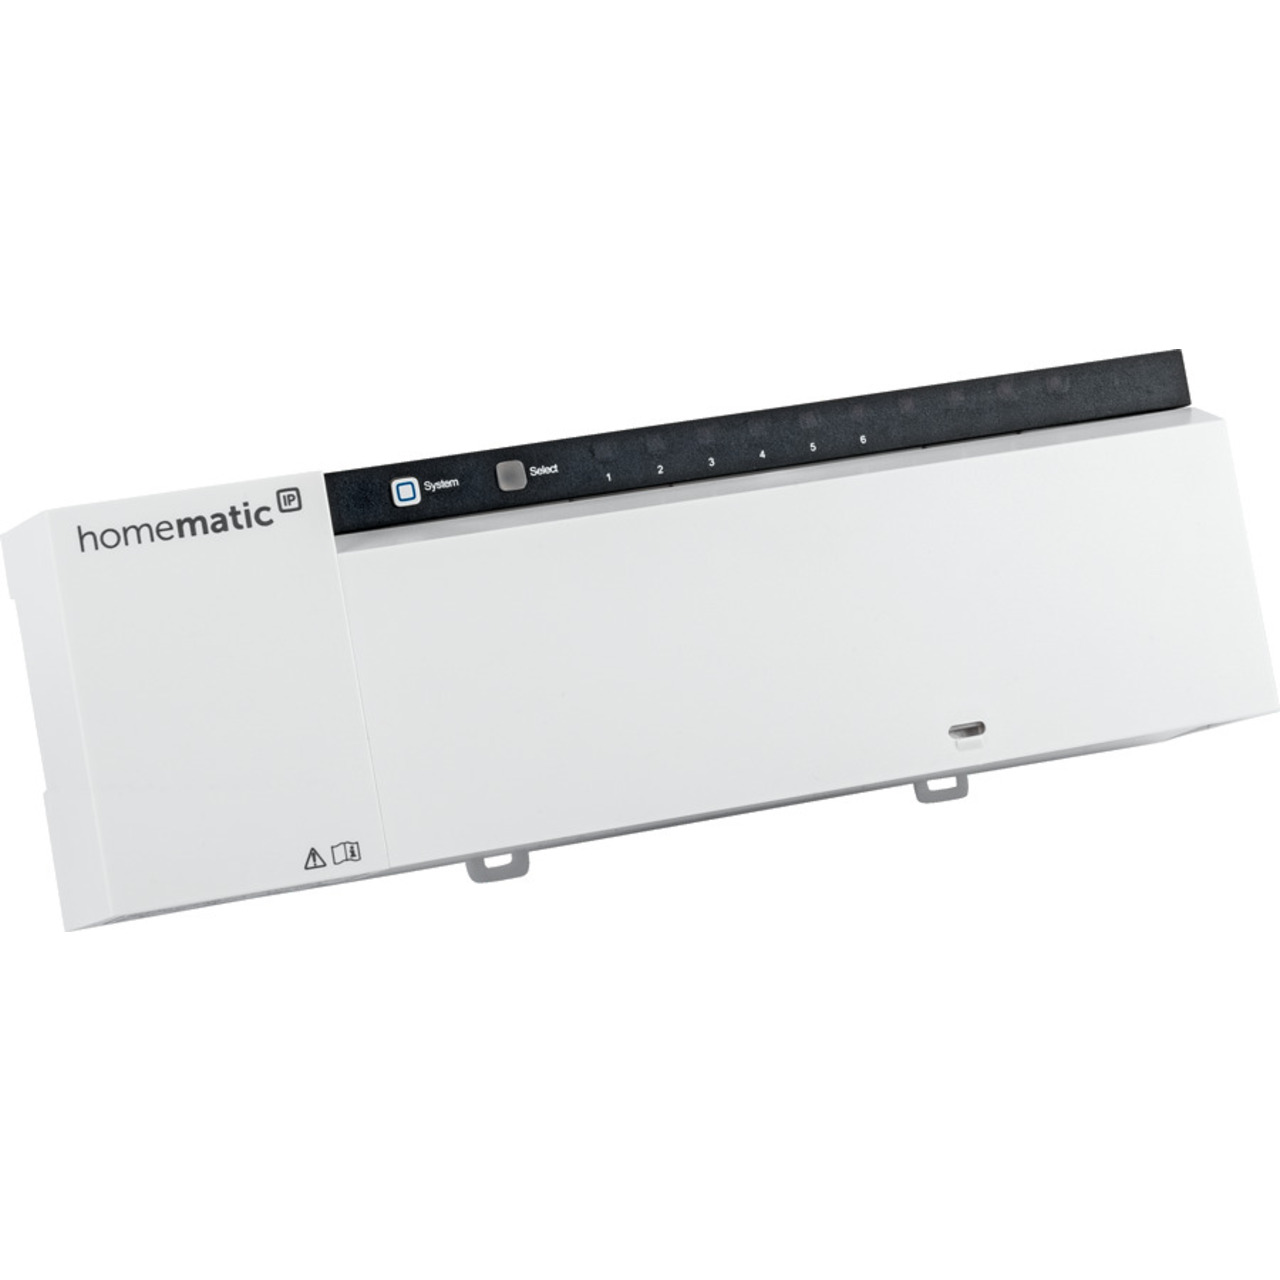 Homematic IP Wired Smart Home Fussbodenheizungscontroller HmIPW-FAL24-C6  6-fach- 24 V unter Hausautomation